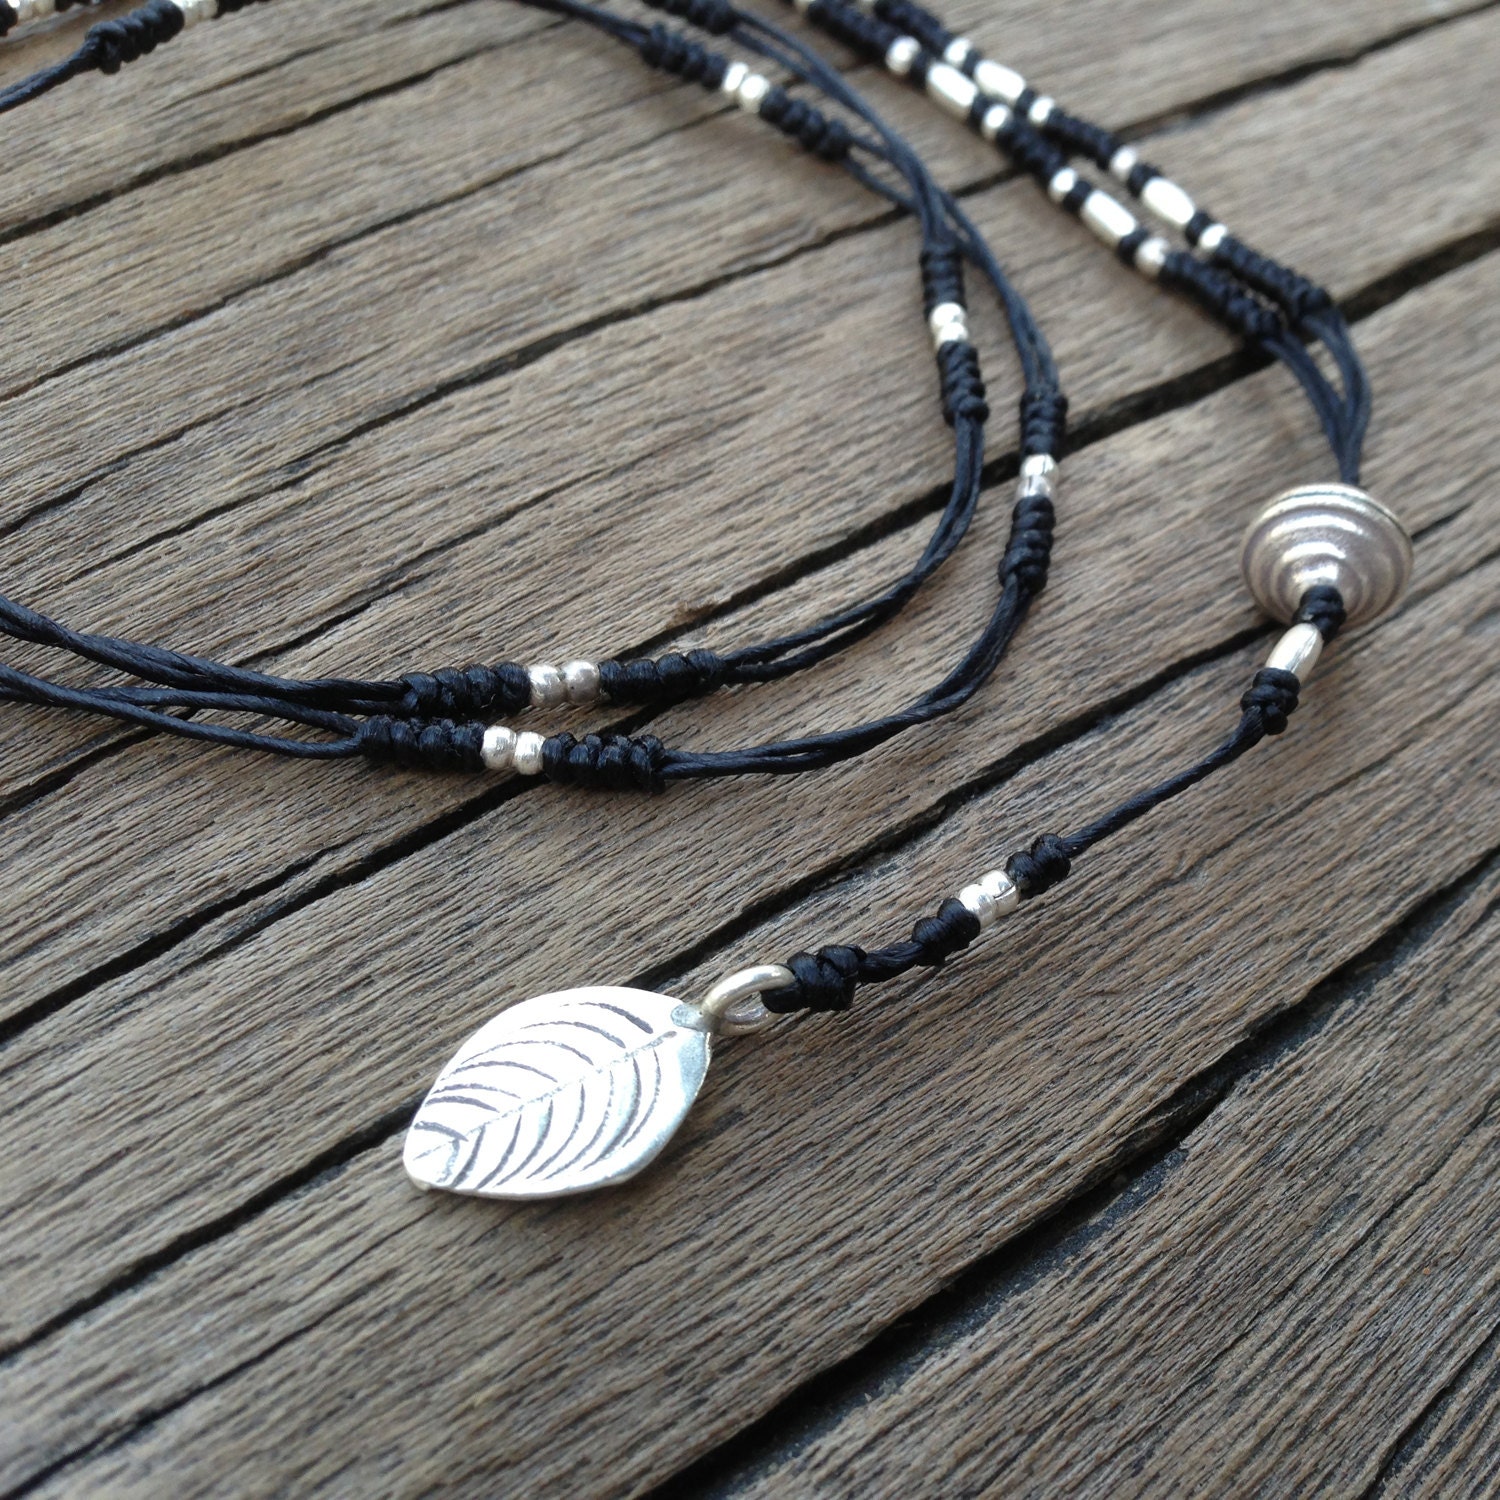 Leaf Charm Long Necklace, Sterling Silver Leaf and Beads, Casual Chic Dainty Delicate Necklace, Black Necklace, Friendship Necklace, Summer - PiscesAndFishes